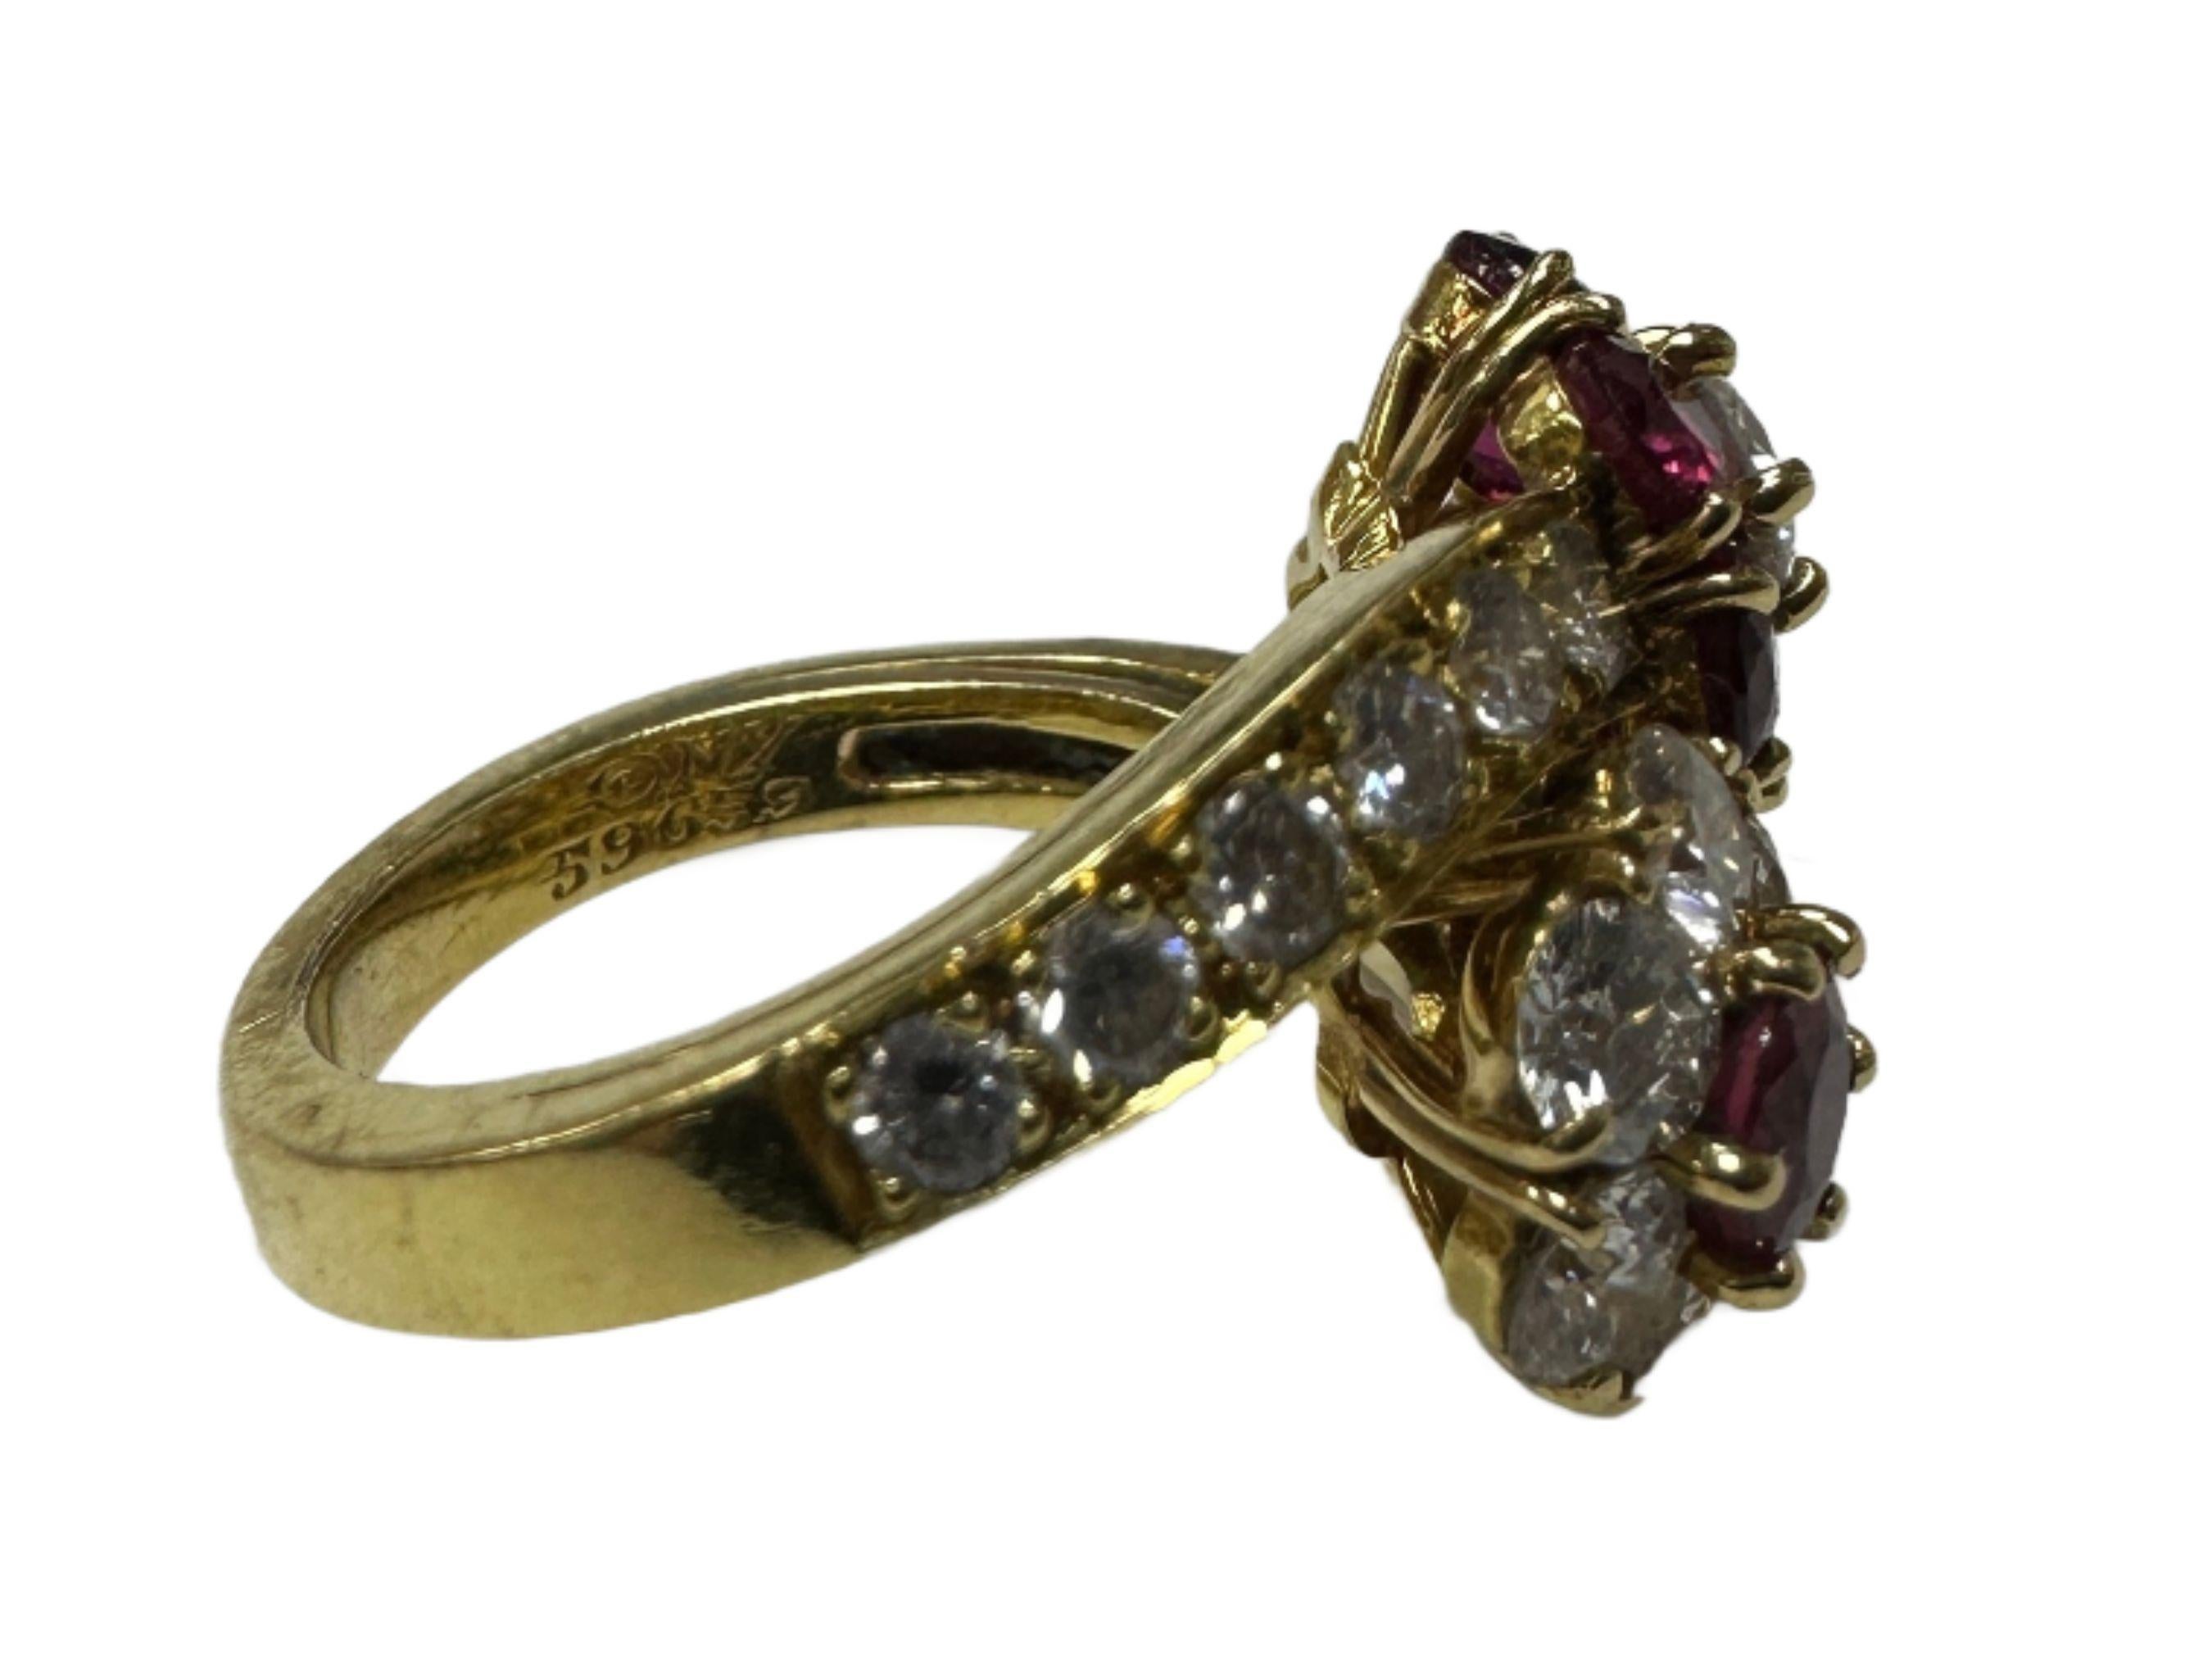 18k Estate Van Cleef & Arpels Diamond and Ruby Bypass Ring 1